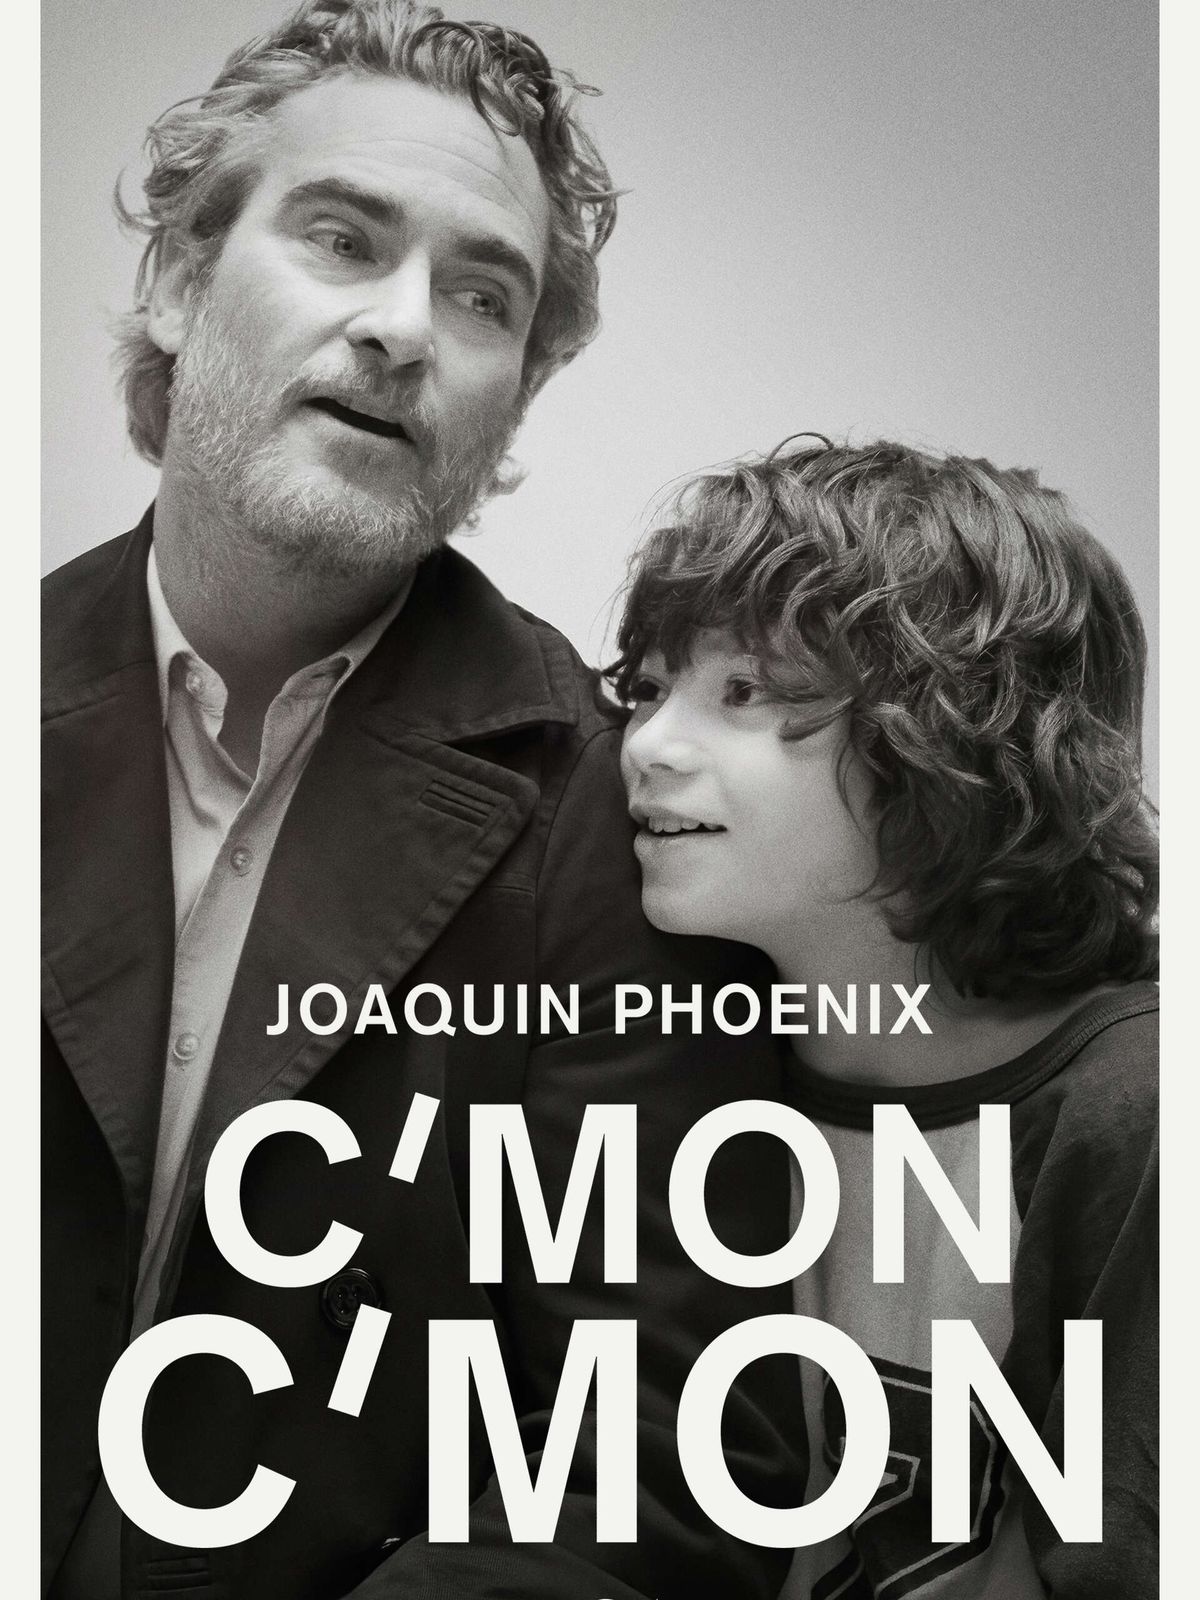 Streaming.  Joaquin Phoenix Shines On Hbo Max With A Film That Will Surprise You.  Crying.